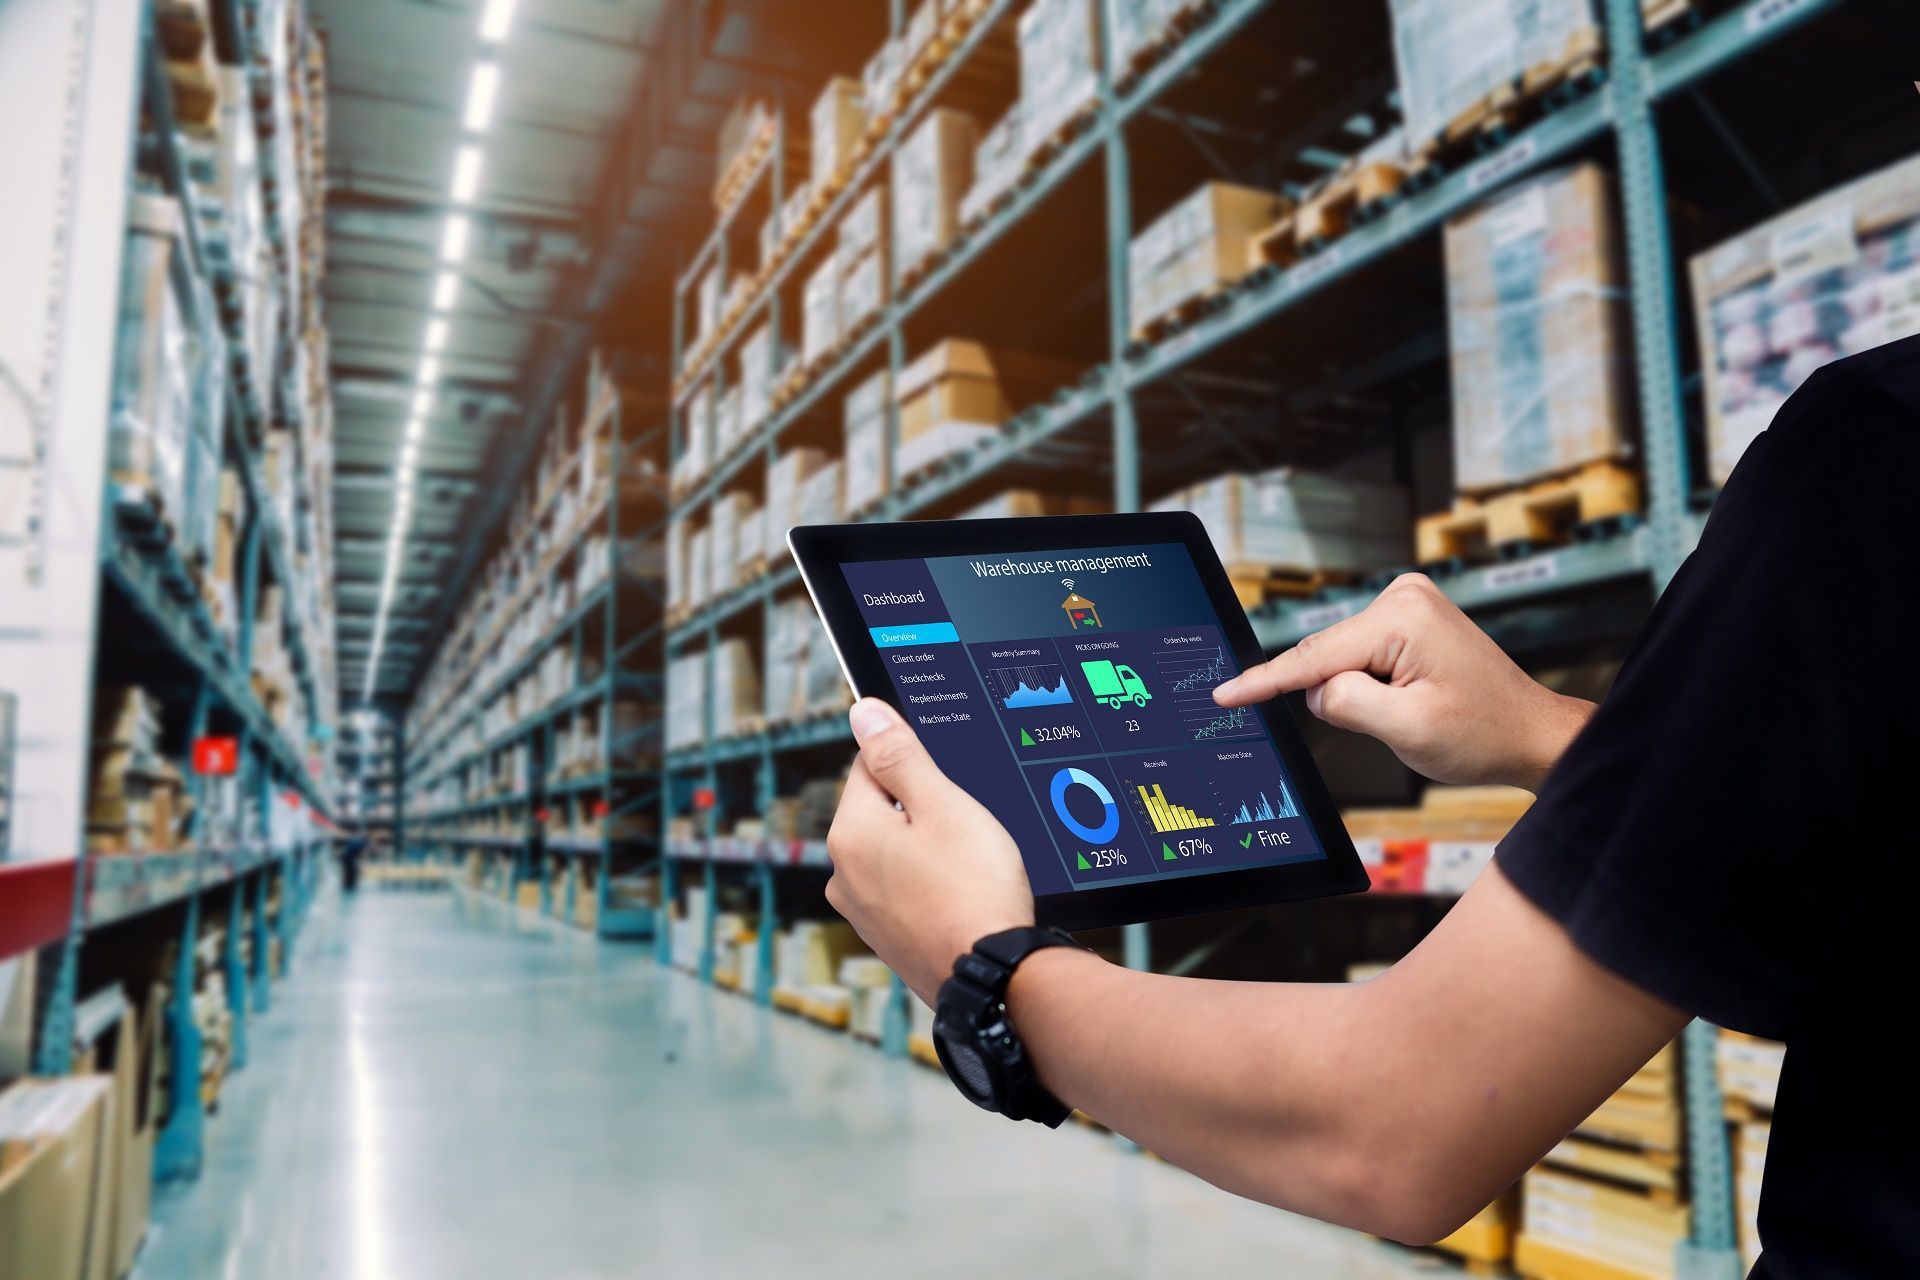 warehouse management software cost